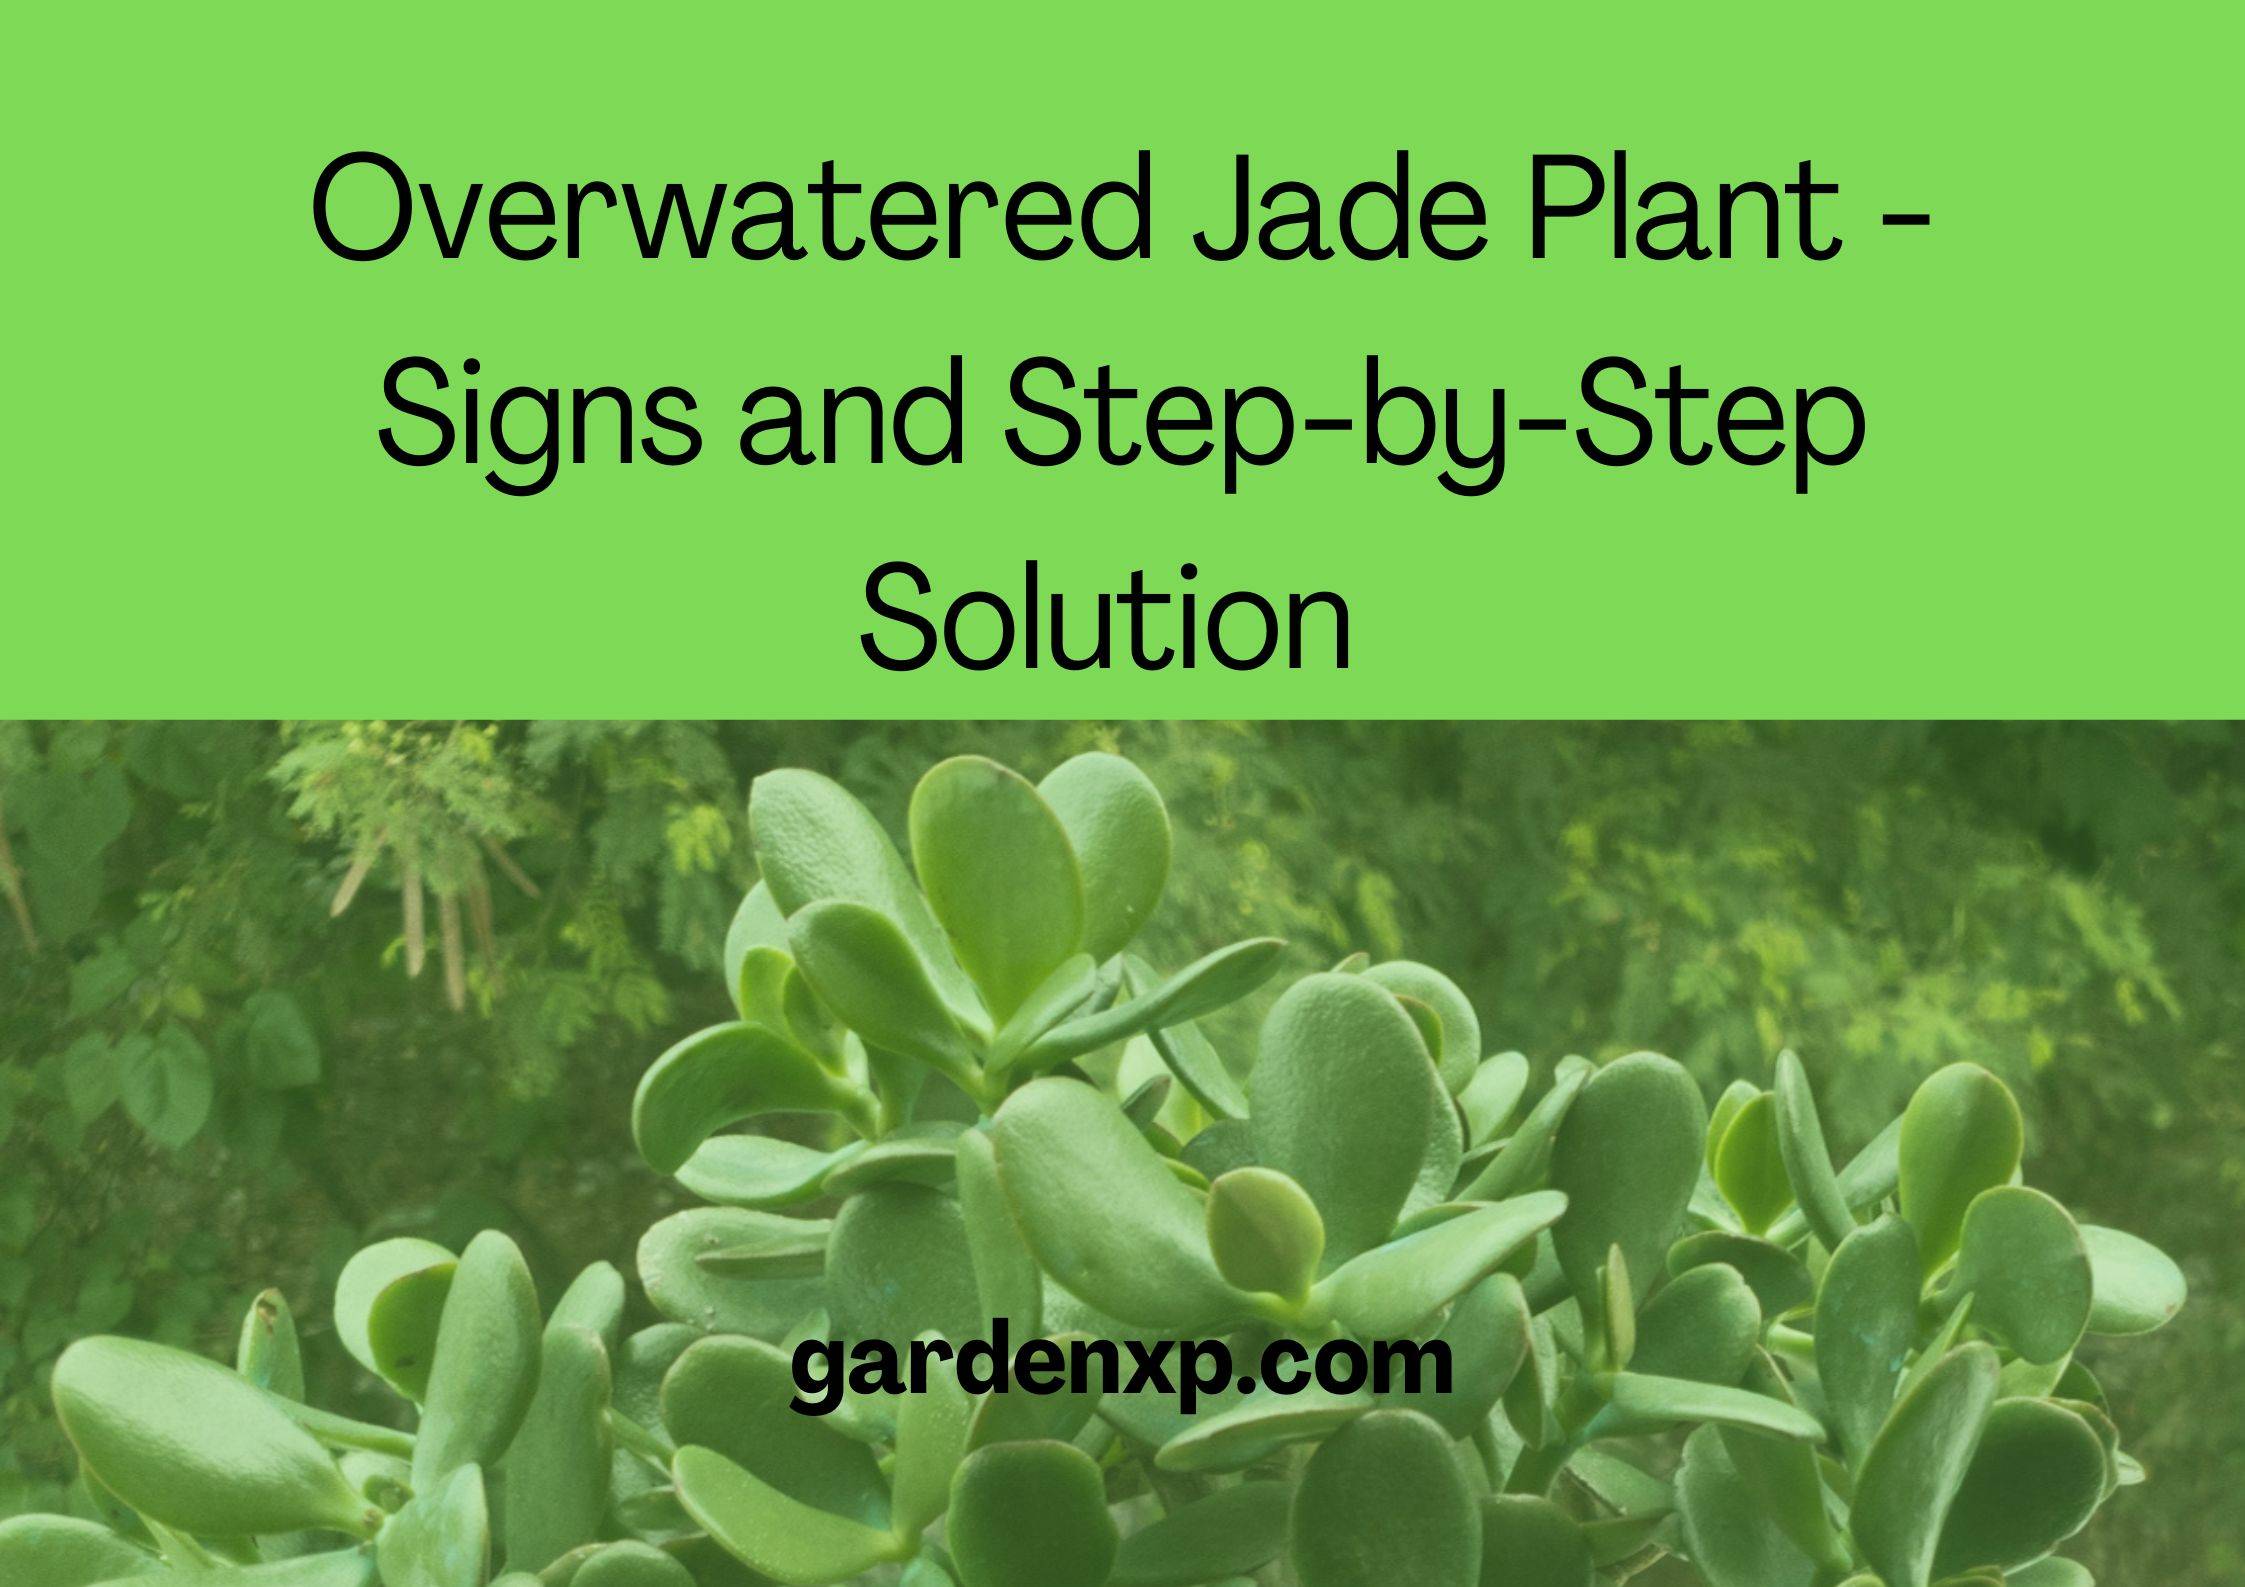 Overwatered Jade Plant - Signs and Step-by-Step Solution 